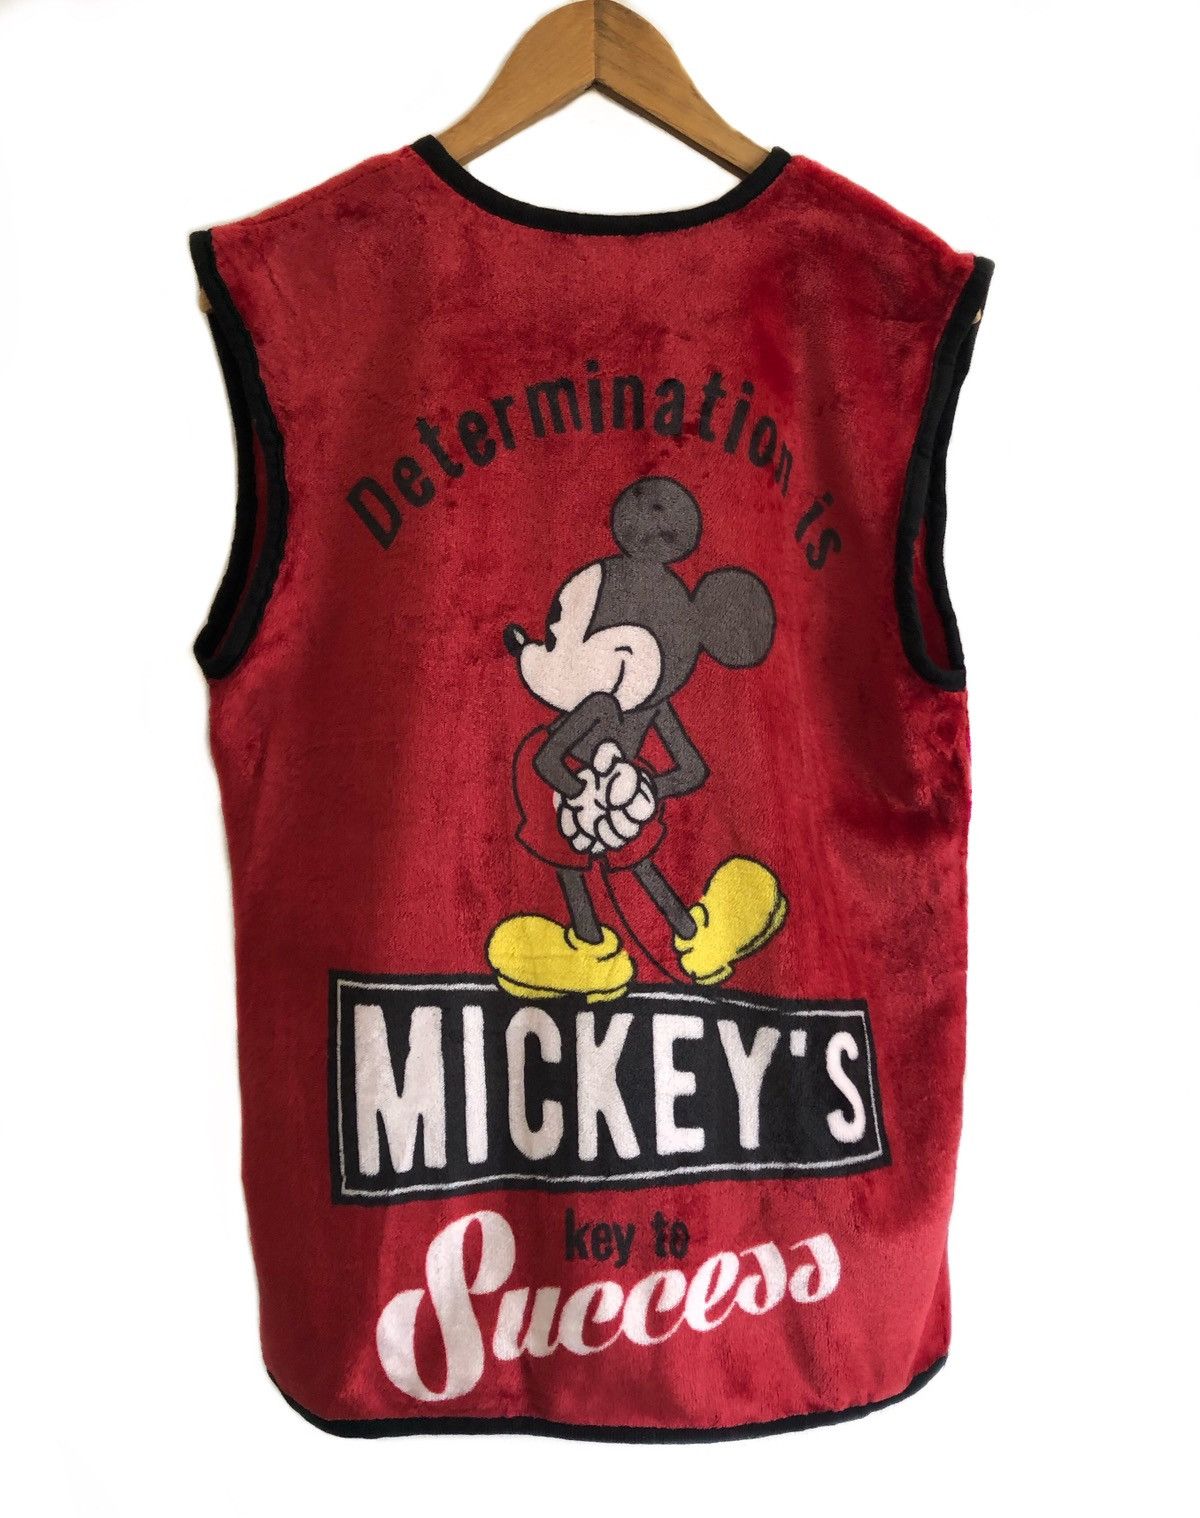 Vintage 80s Mickey Mouse cardigan vests - 6